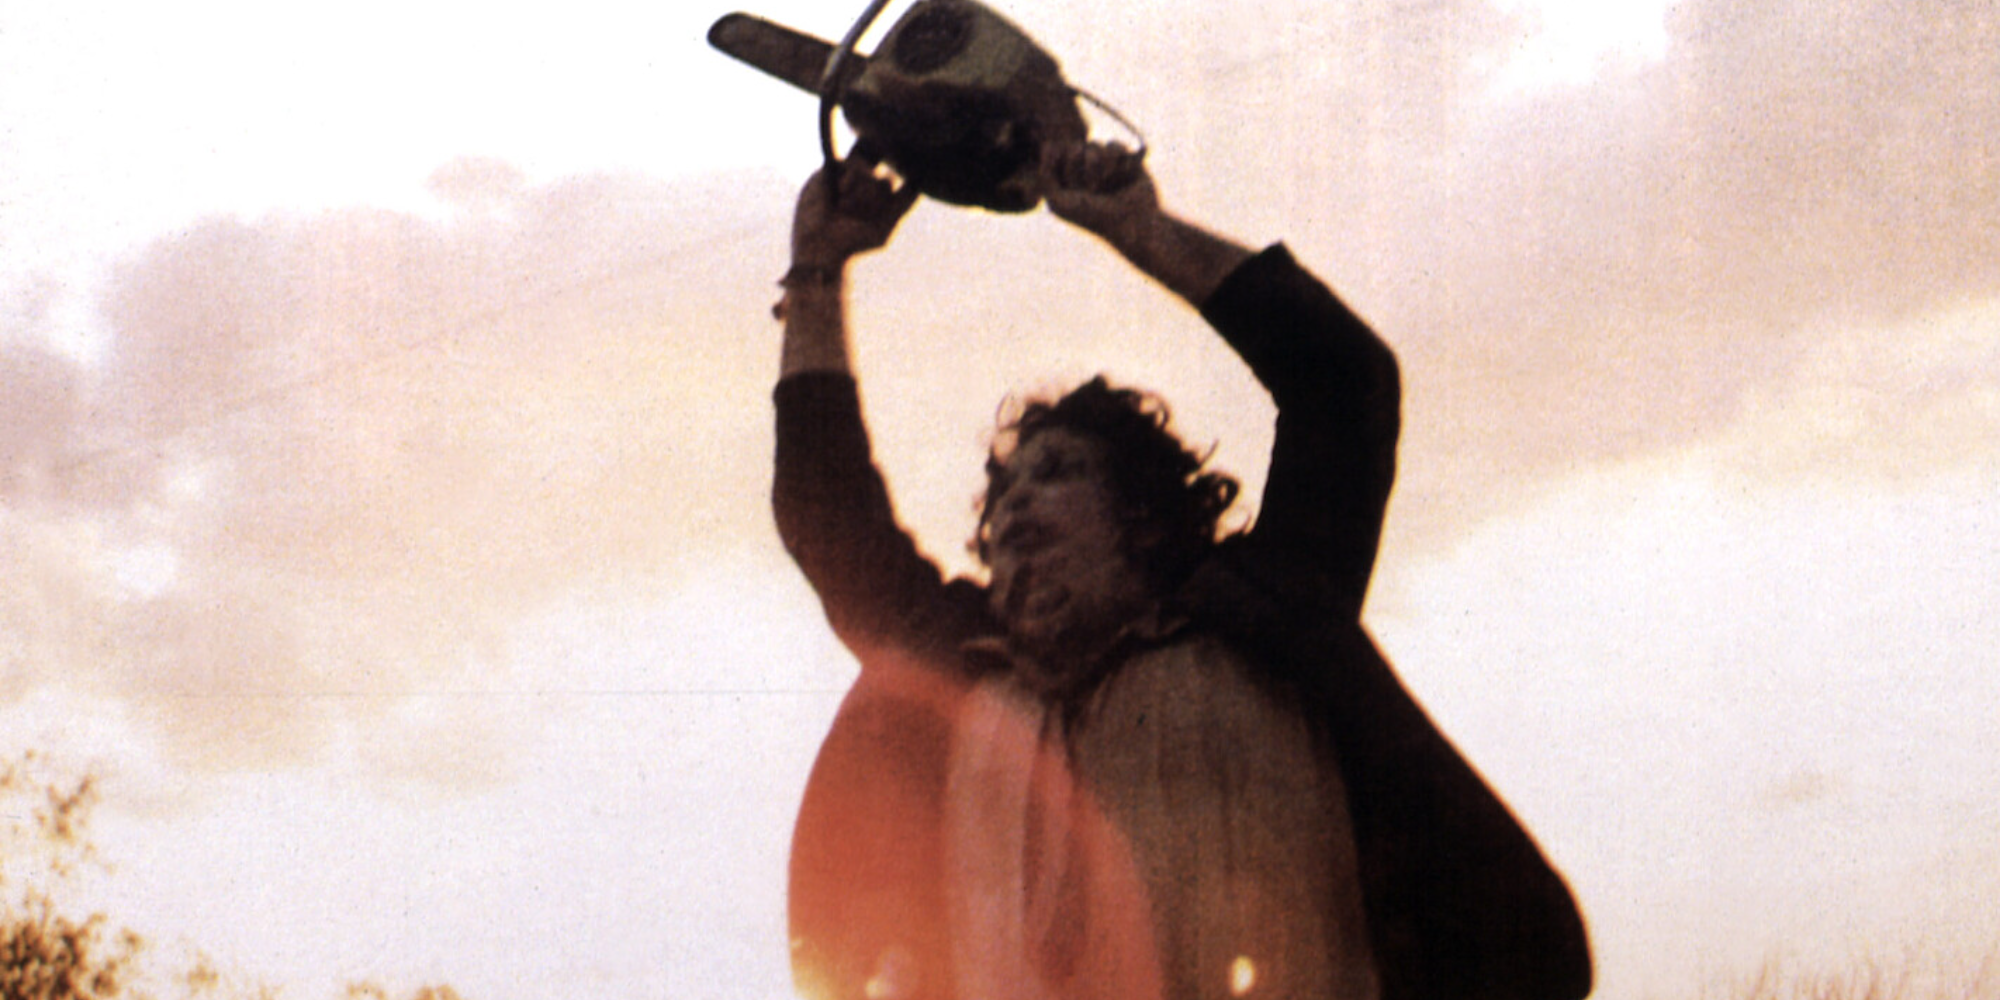 texas chainsaw massacre leatherface spins around with his chainsaw in the road